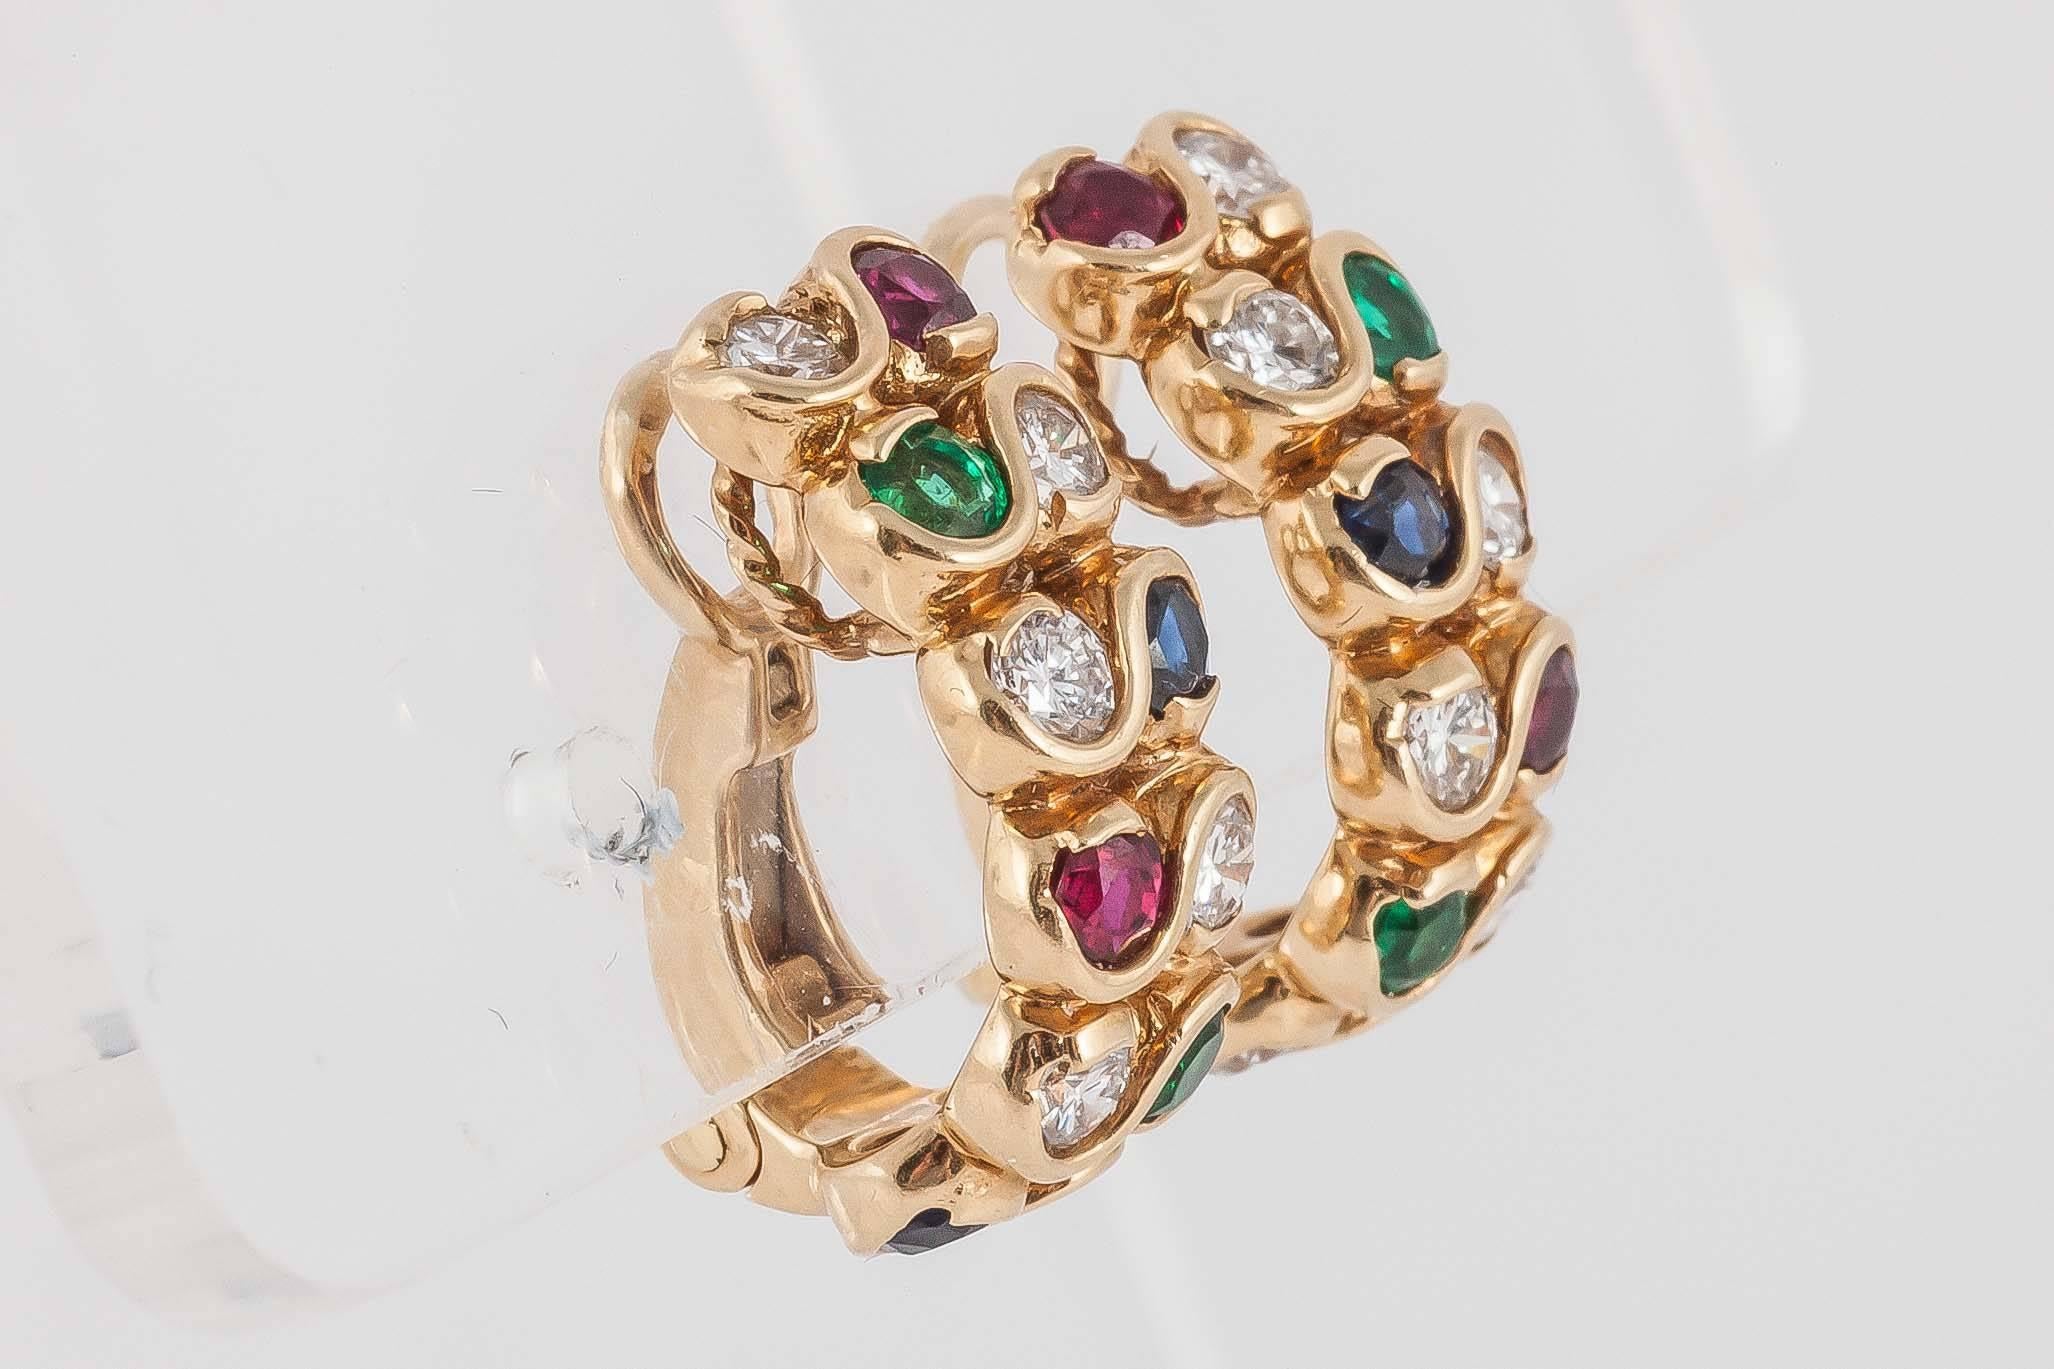 French hoop earrings set with Emeralds, Diamonds, Rubies and Sapphires set in 18ct Gold